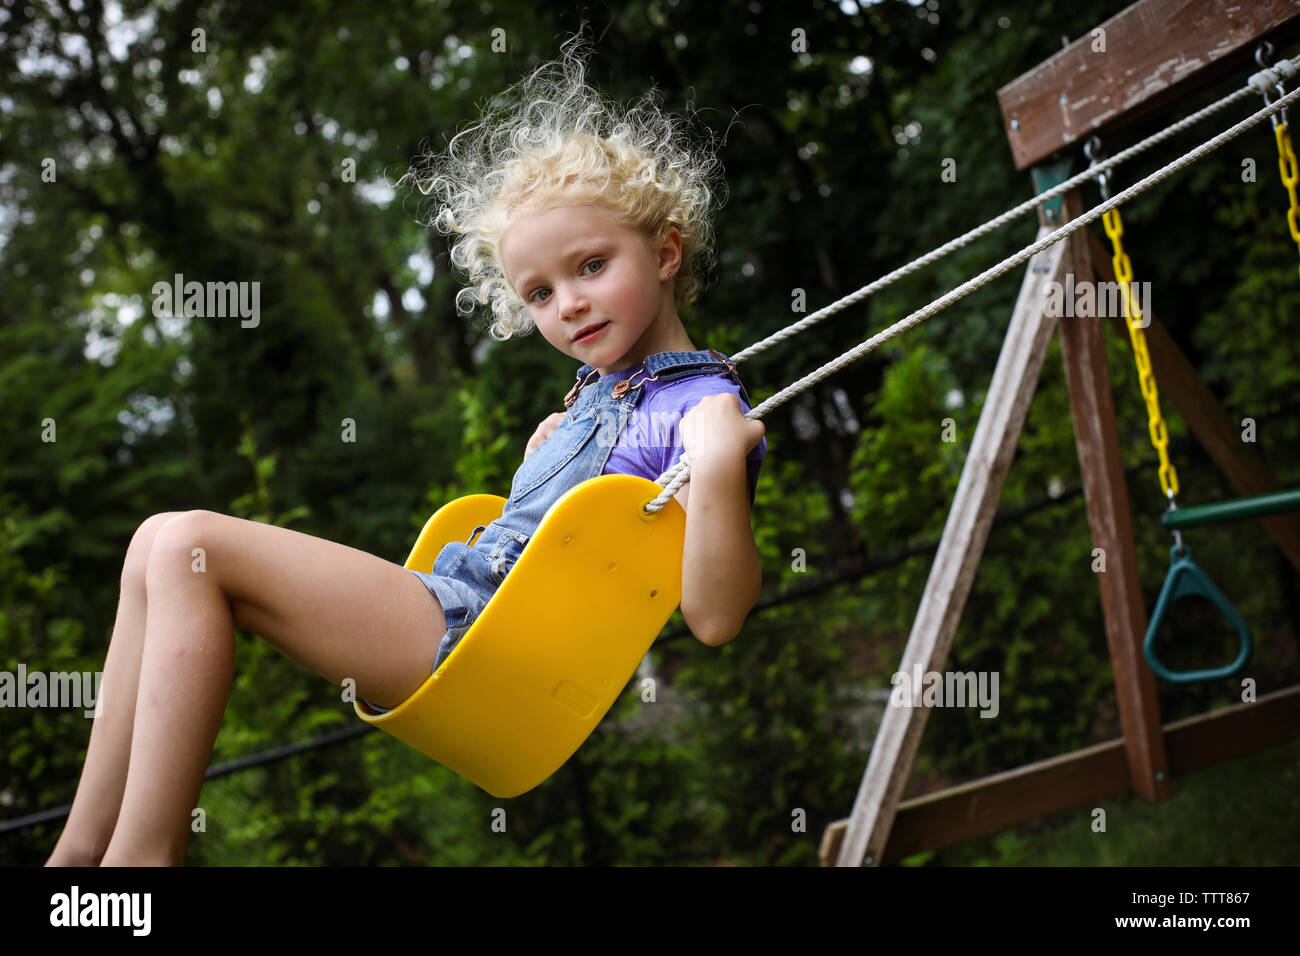 Low angle portrait of cute girl swinging against trees at playground ...